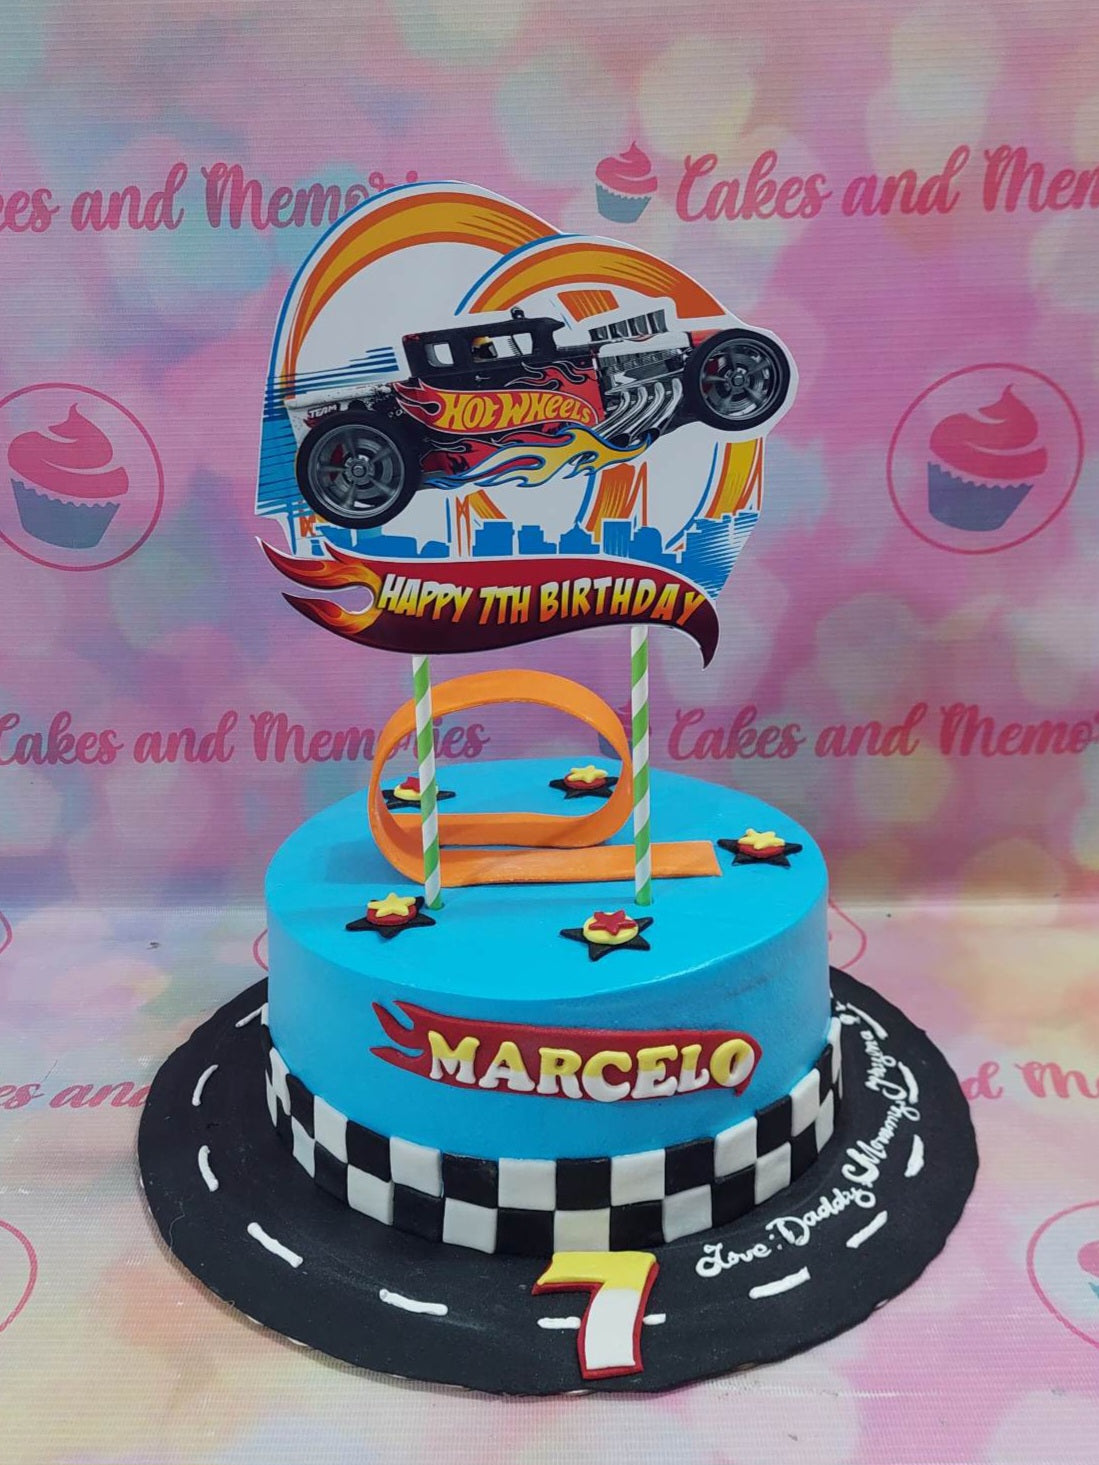 This Hotwheels Cake is perfect for any kid's birthday! It features a checkered race-track design decorated with a hot wheels car, and accented with orange and blue. Made with premium ingredients, this custom cake is sure to excite any young racing fan.